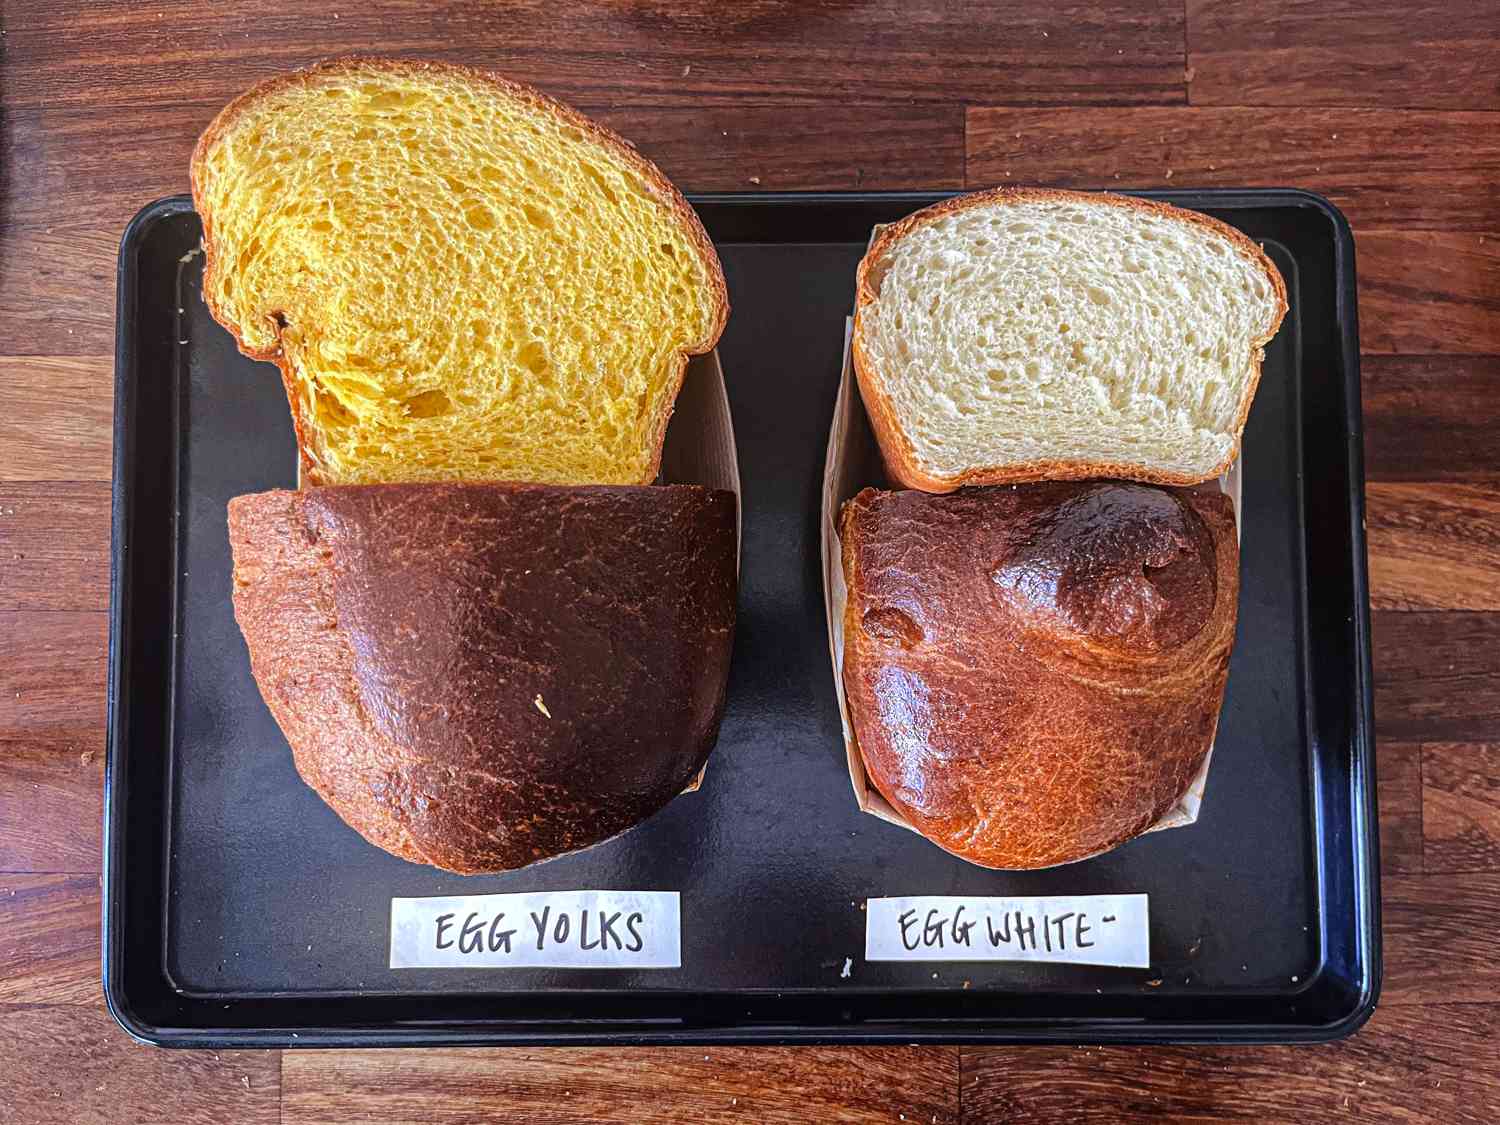 Cross section of two brioche loaves, showing the difference in texture between using just egg yolks and just egg whites